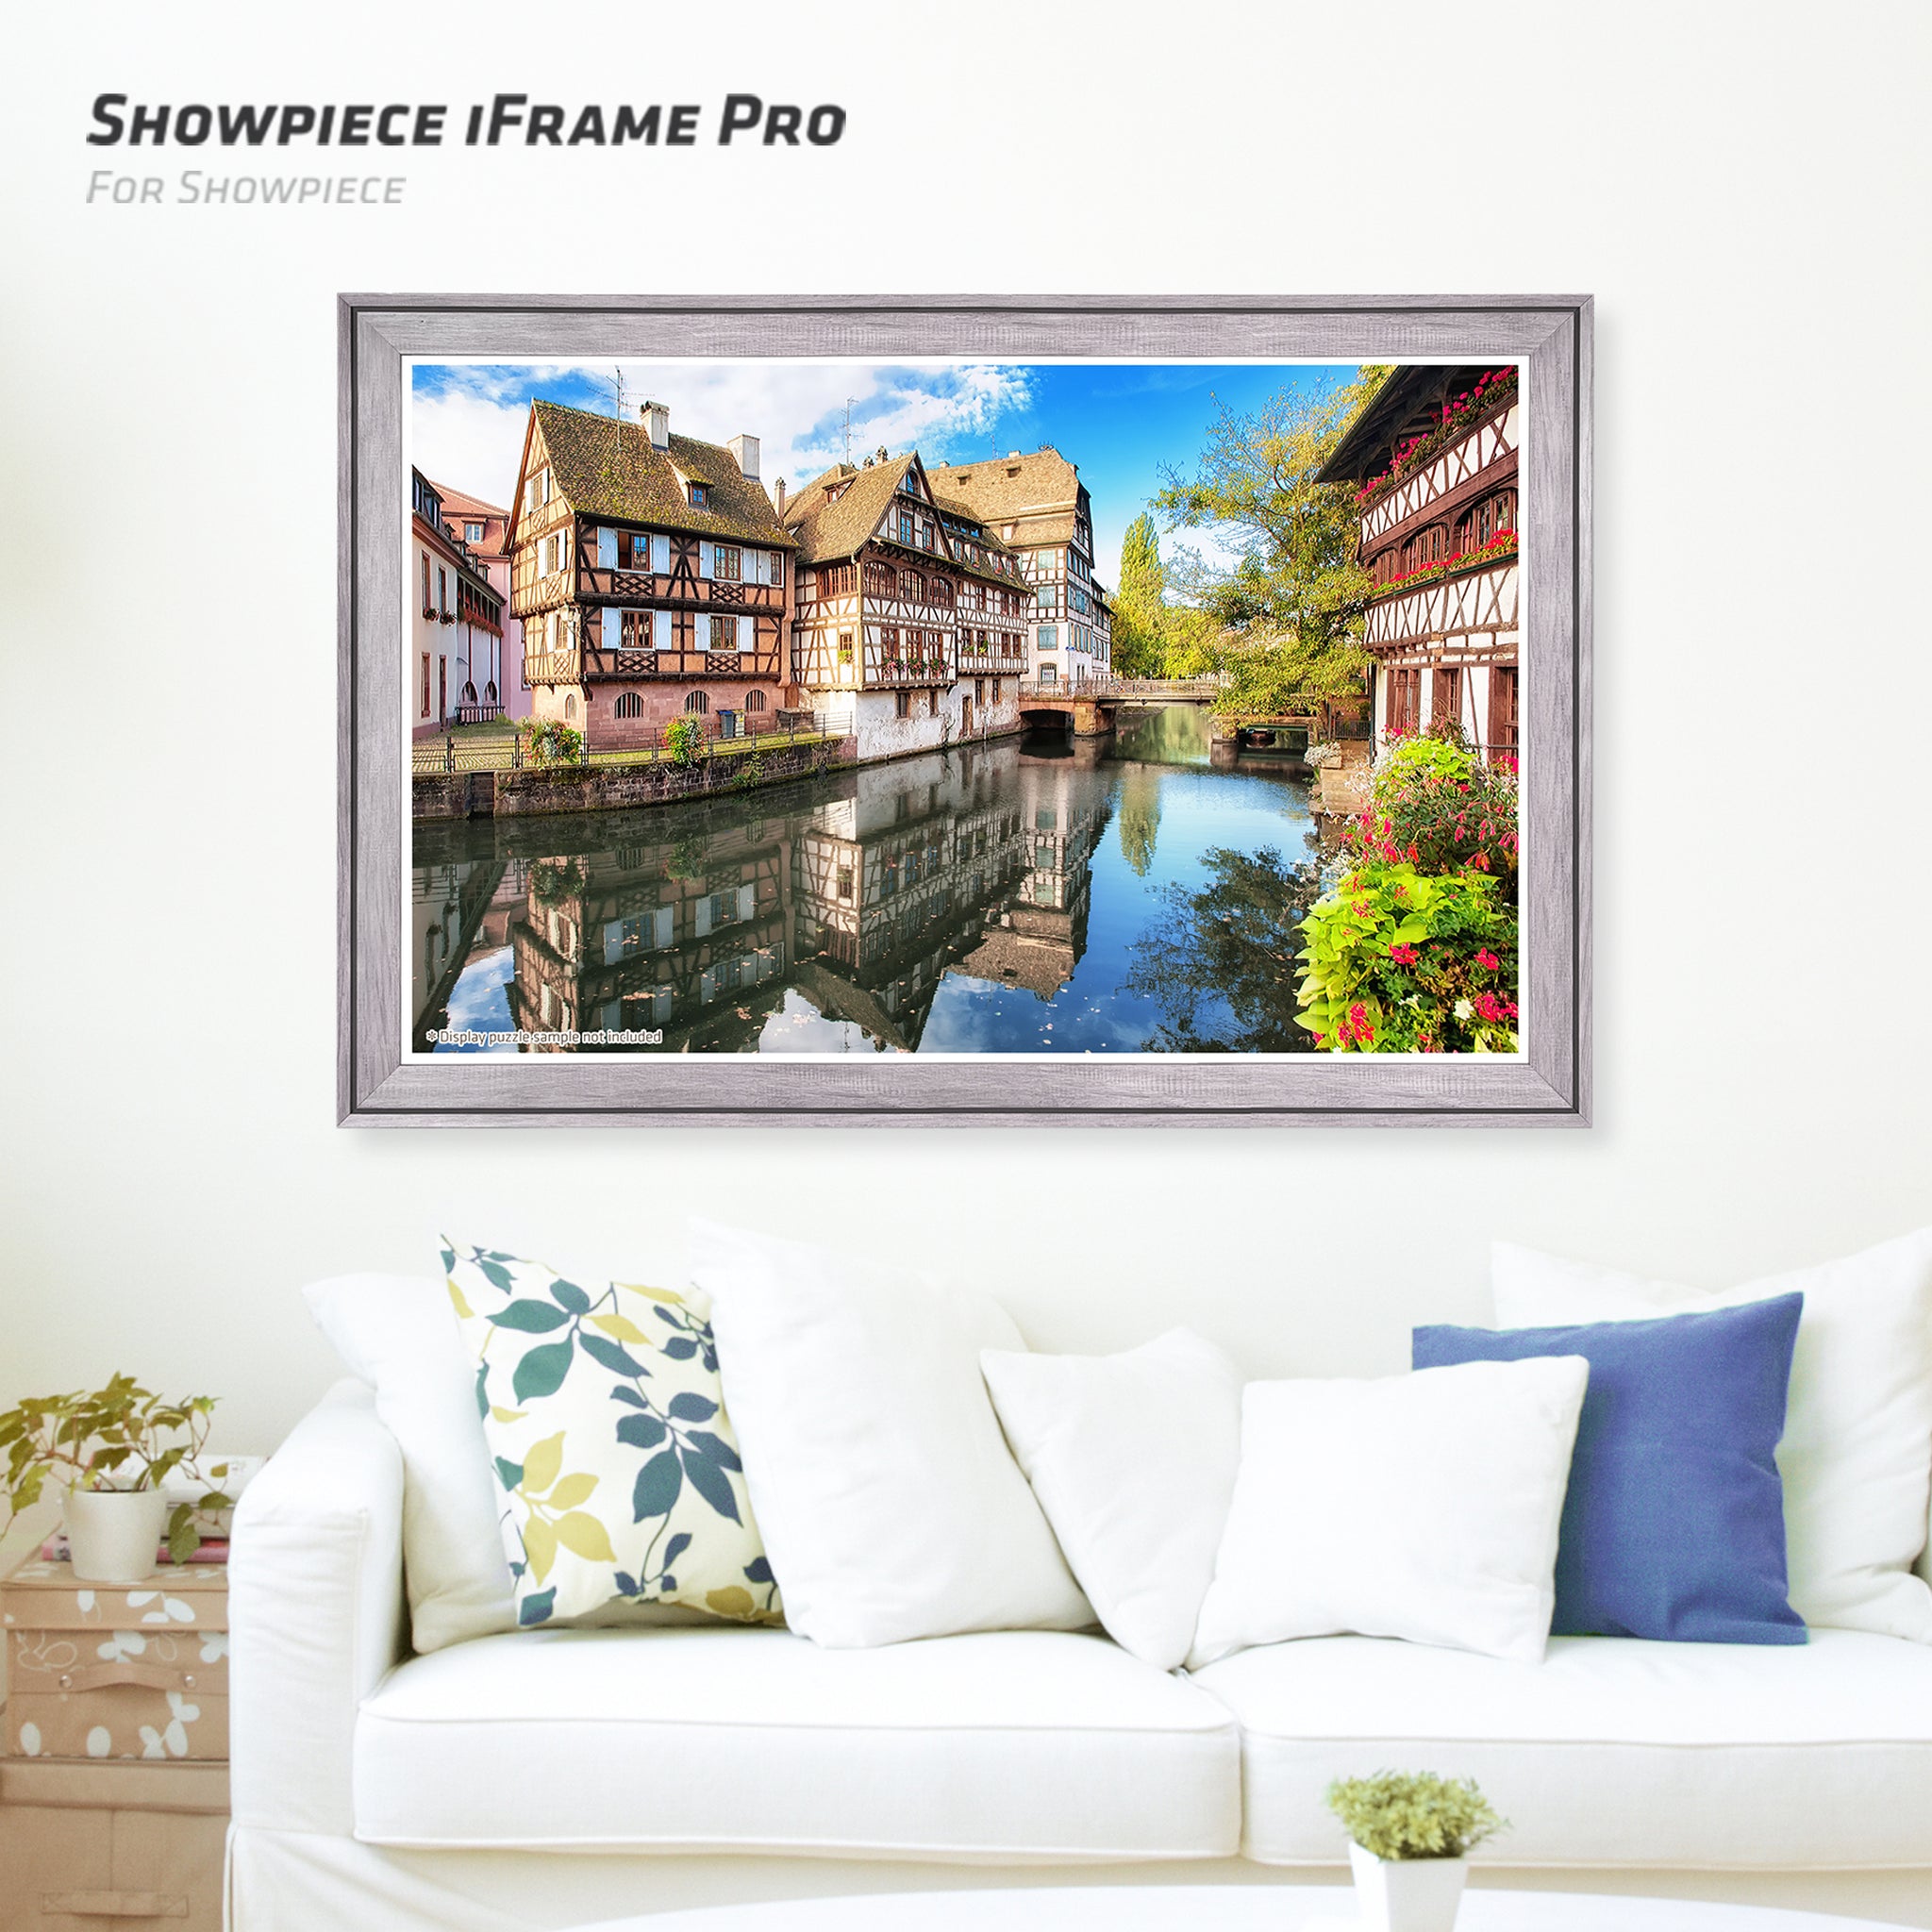 4000-Piece Plastic Puzzle Frame (iFrame pro)